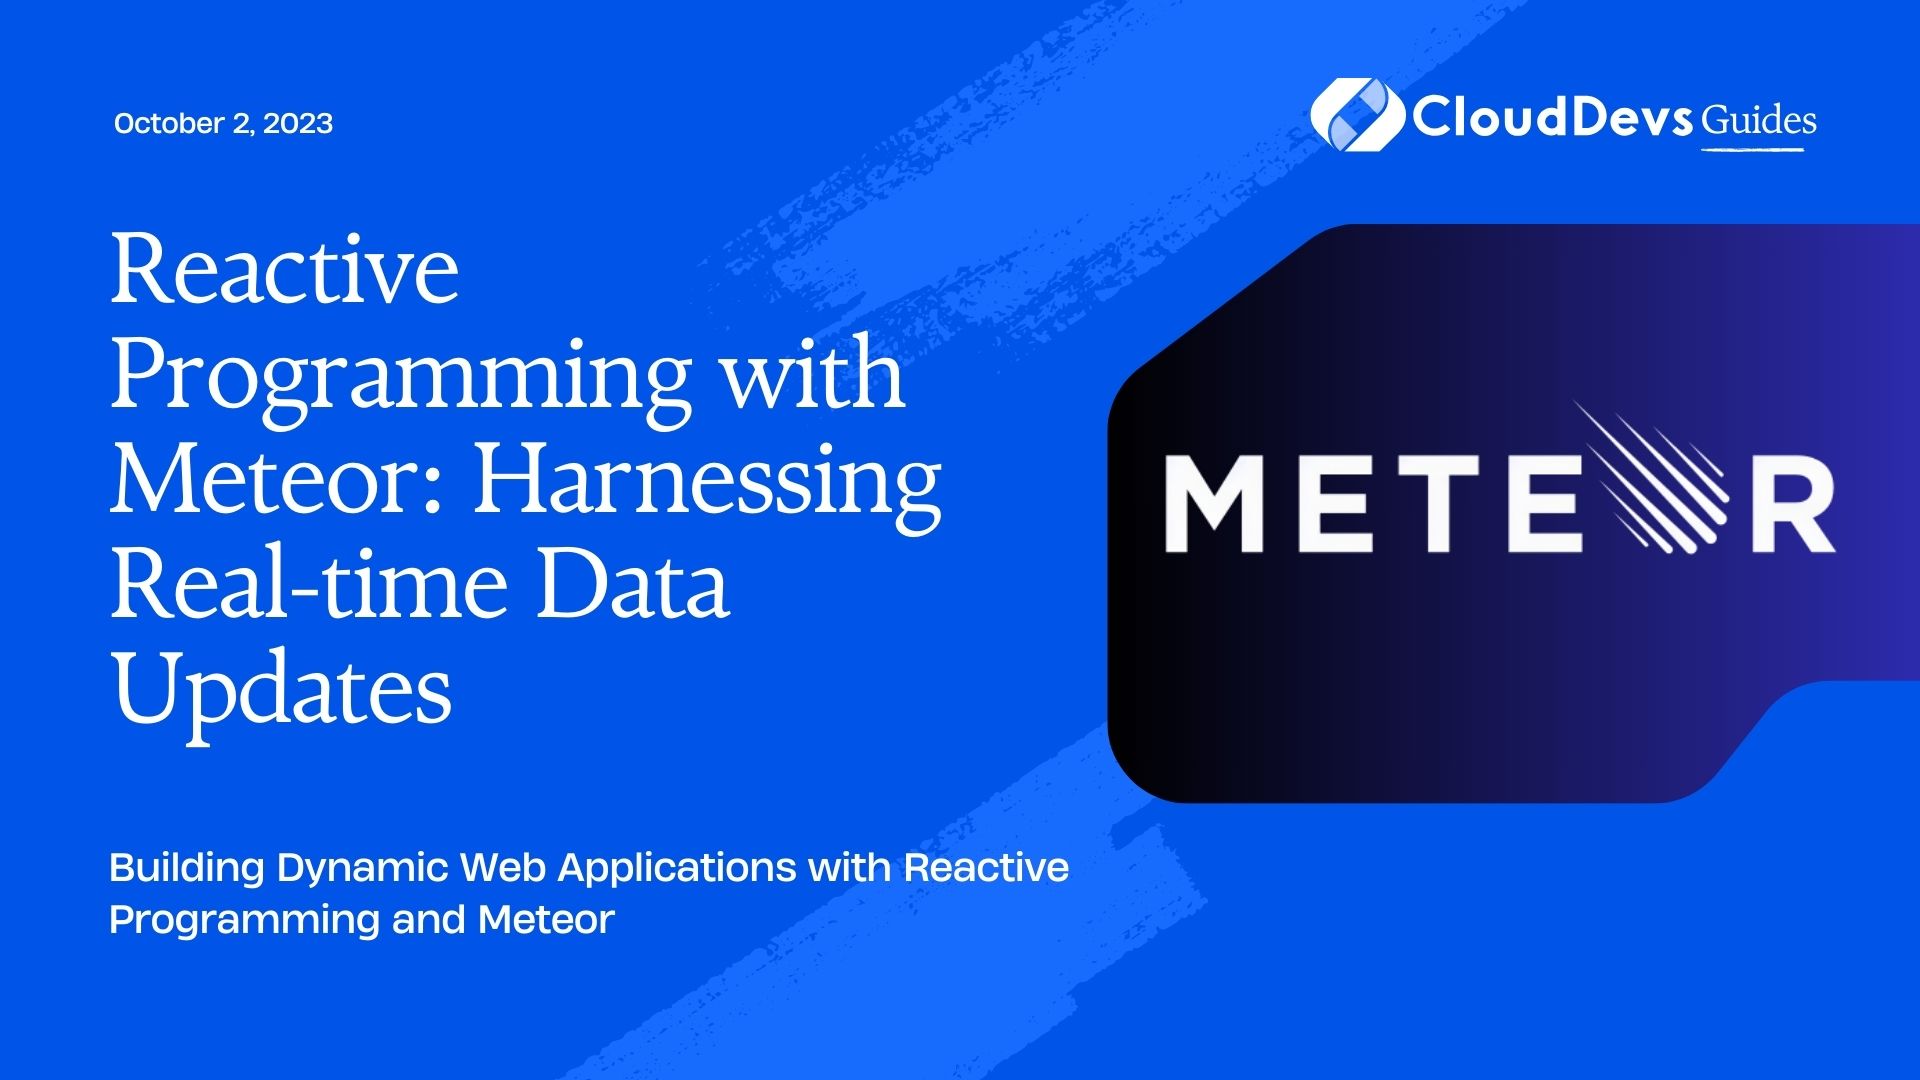 Reactive Programming with Meteor: Harnessing Real-time Data Updates